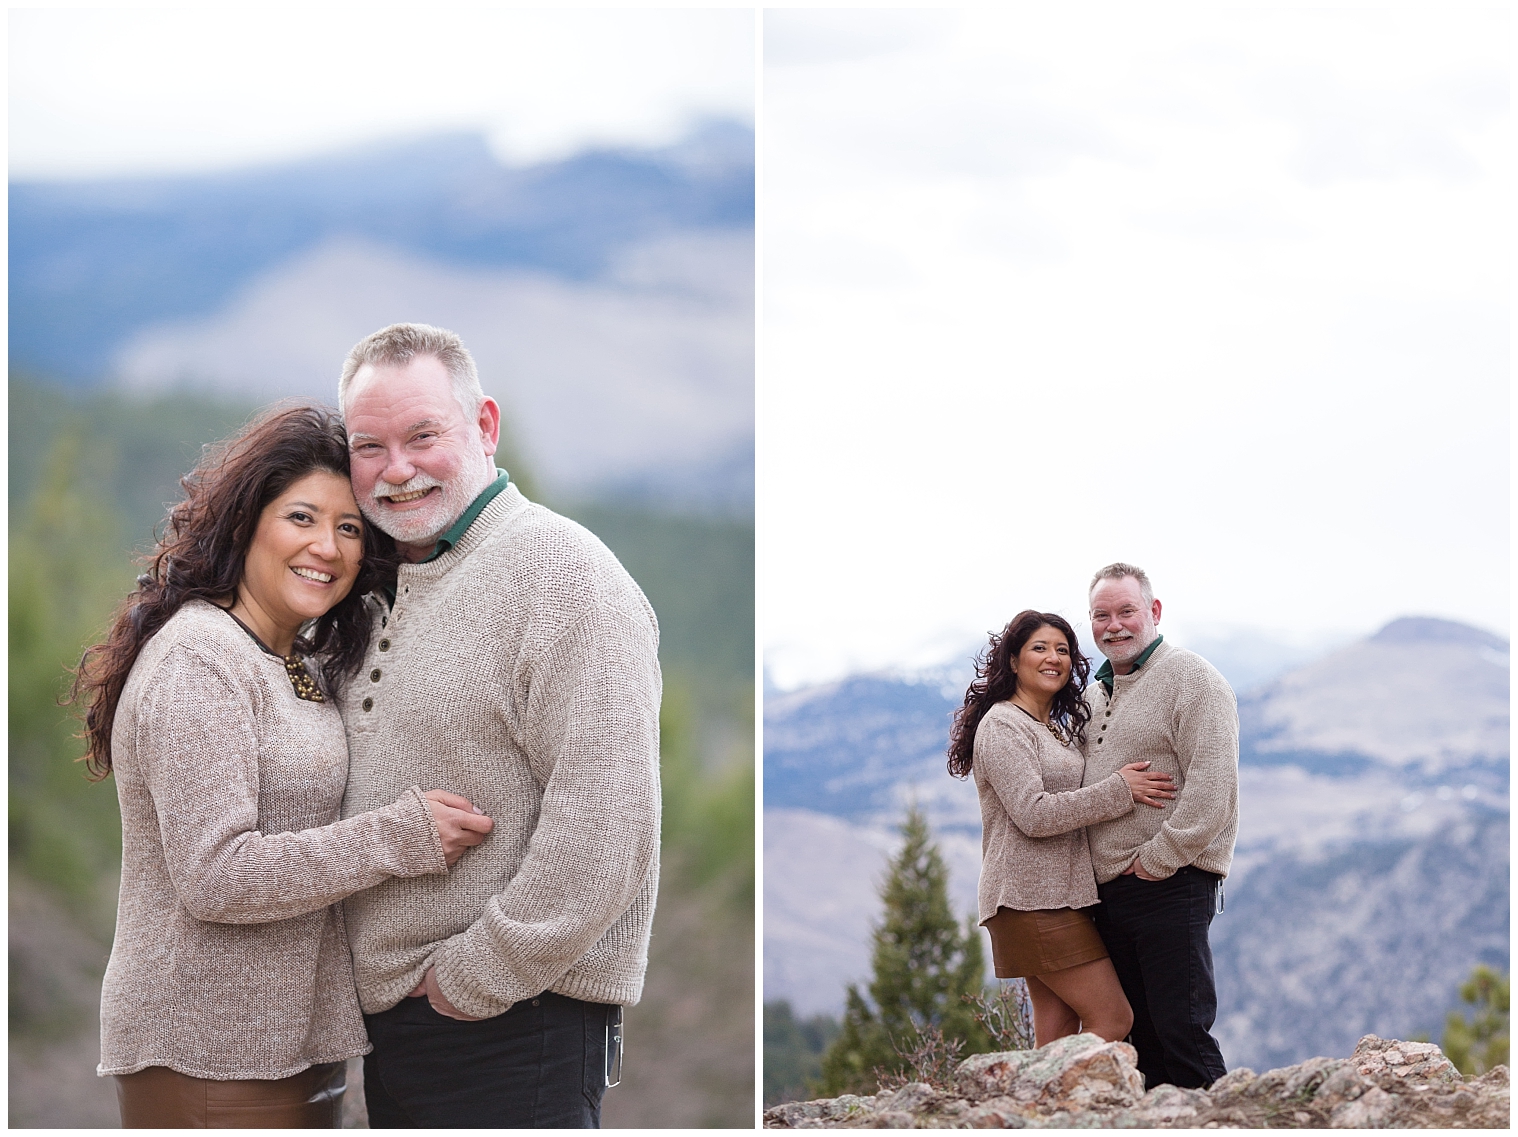 At a Colorado mountain engagement session, woman leans against her fiance.